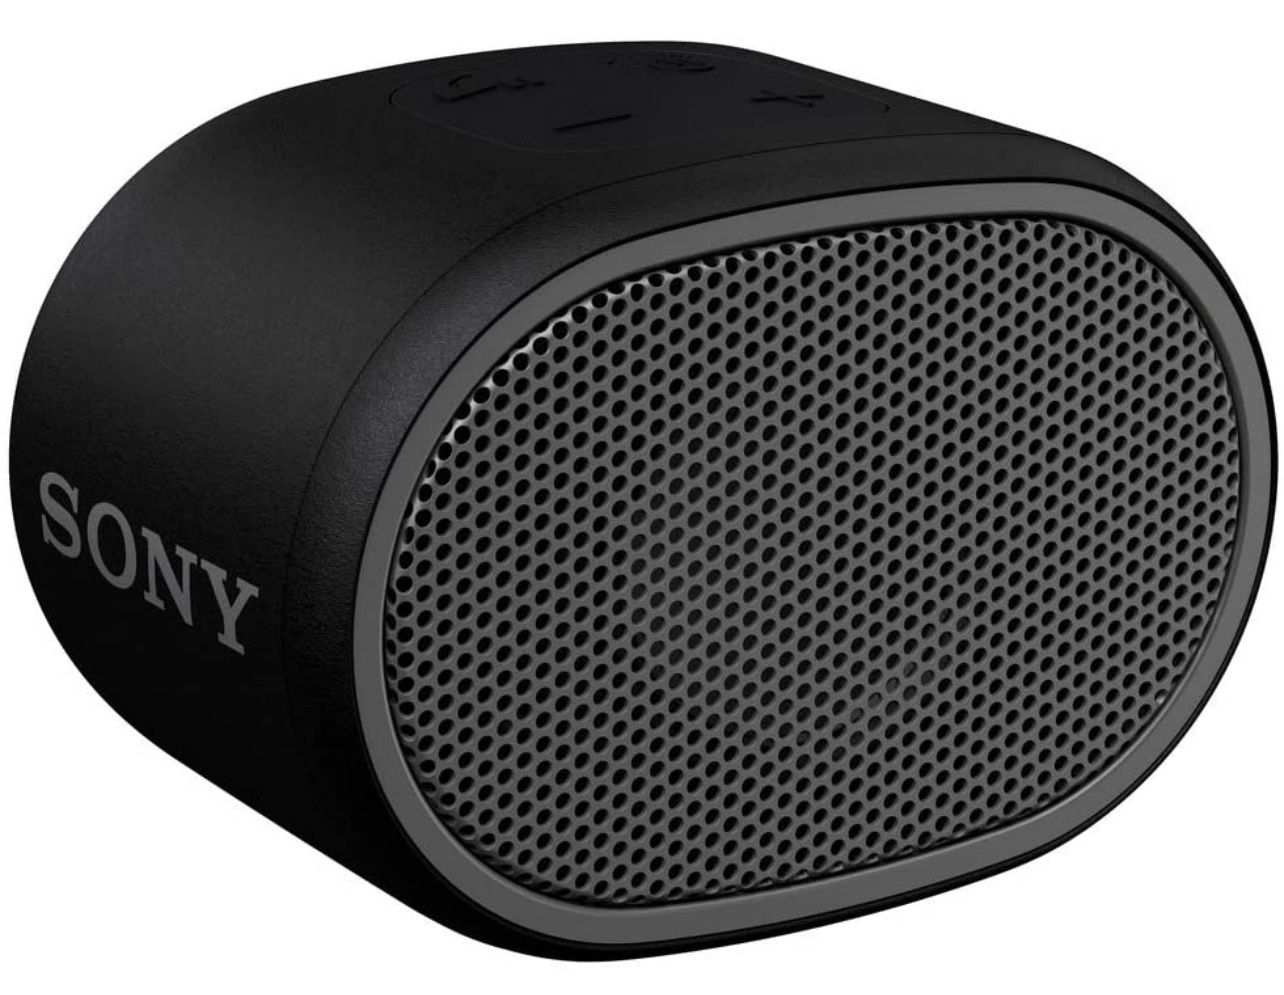 (brand new) Sony SRS-XB01 Compact Portable Bluetooth Speaker: Loud Portable Party Speaker - Built in Mic for Phone Calls Bluetooth Speakers - Black - 